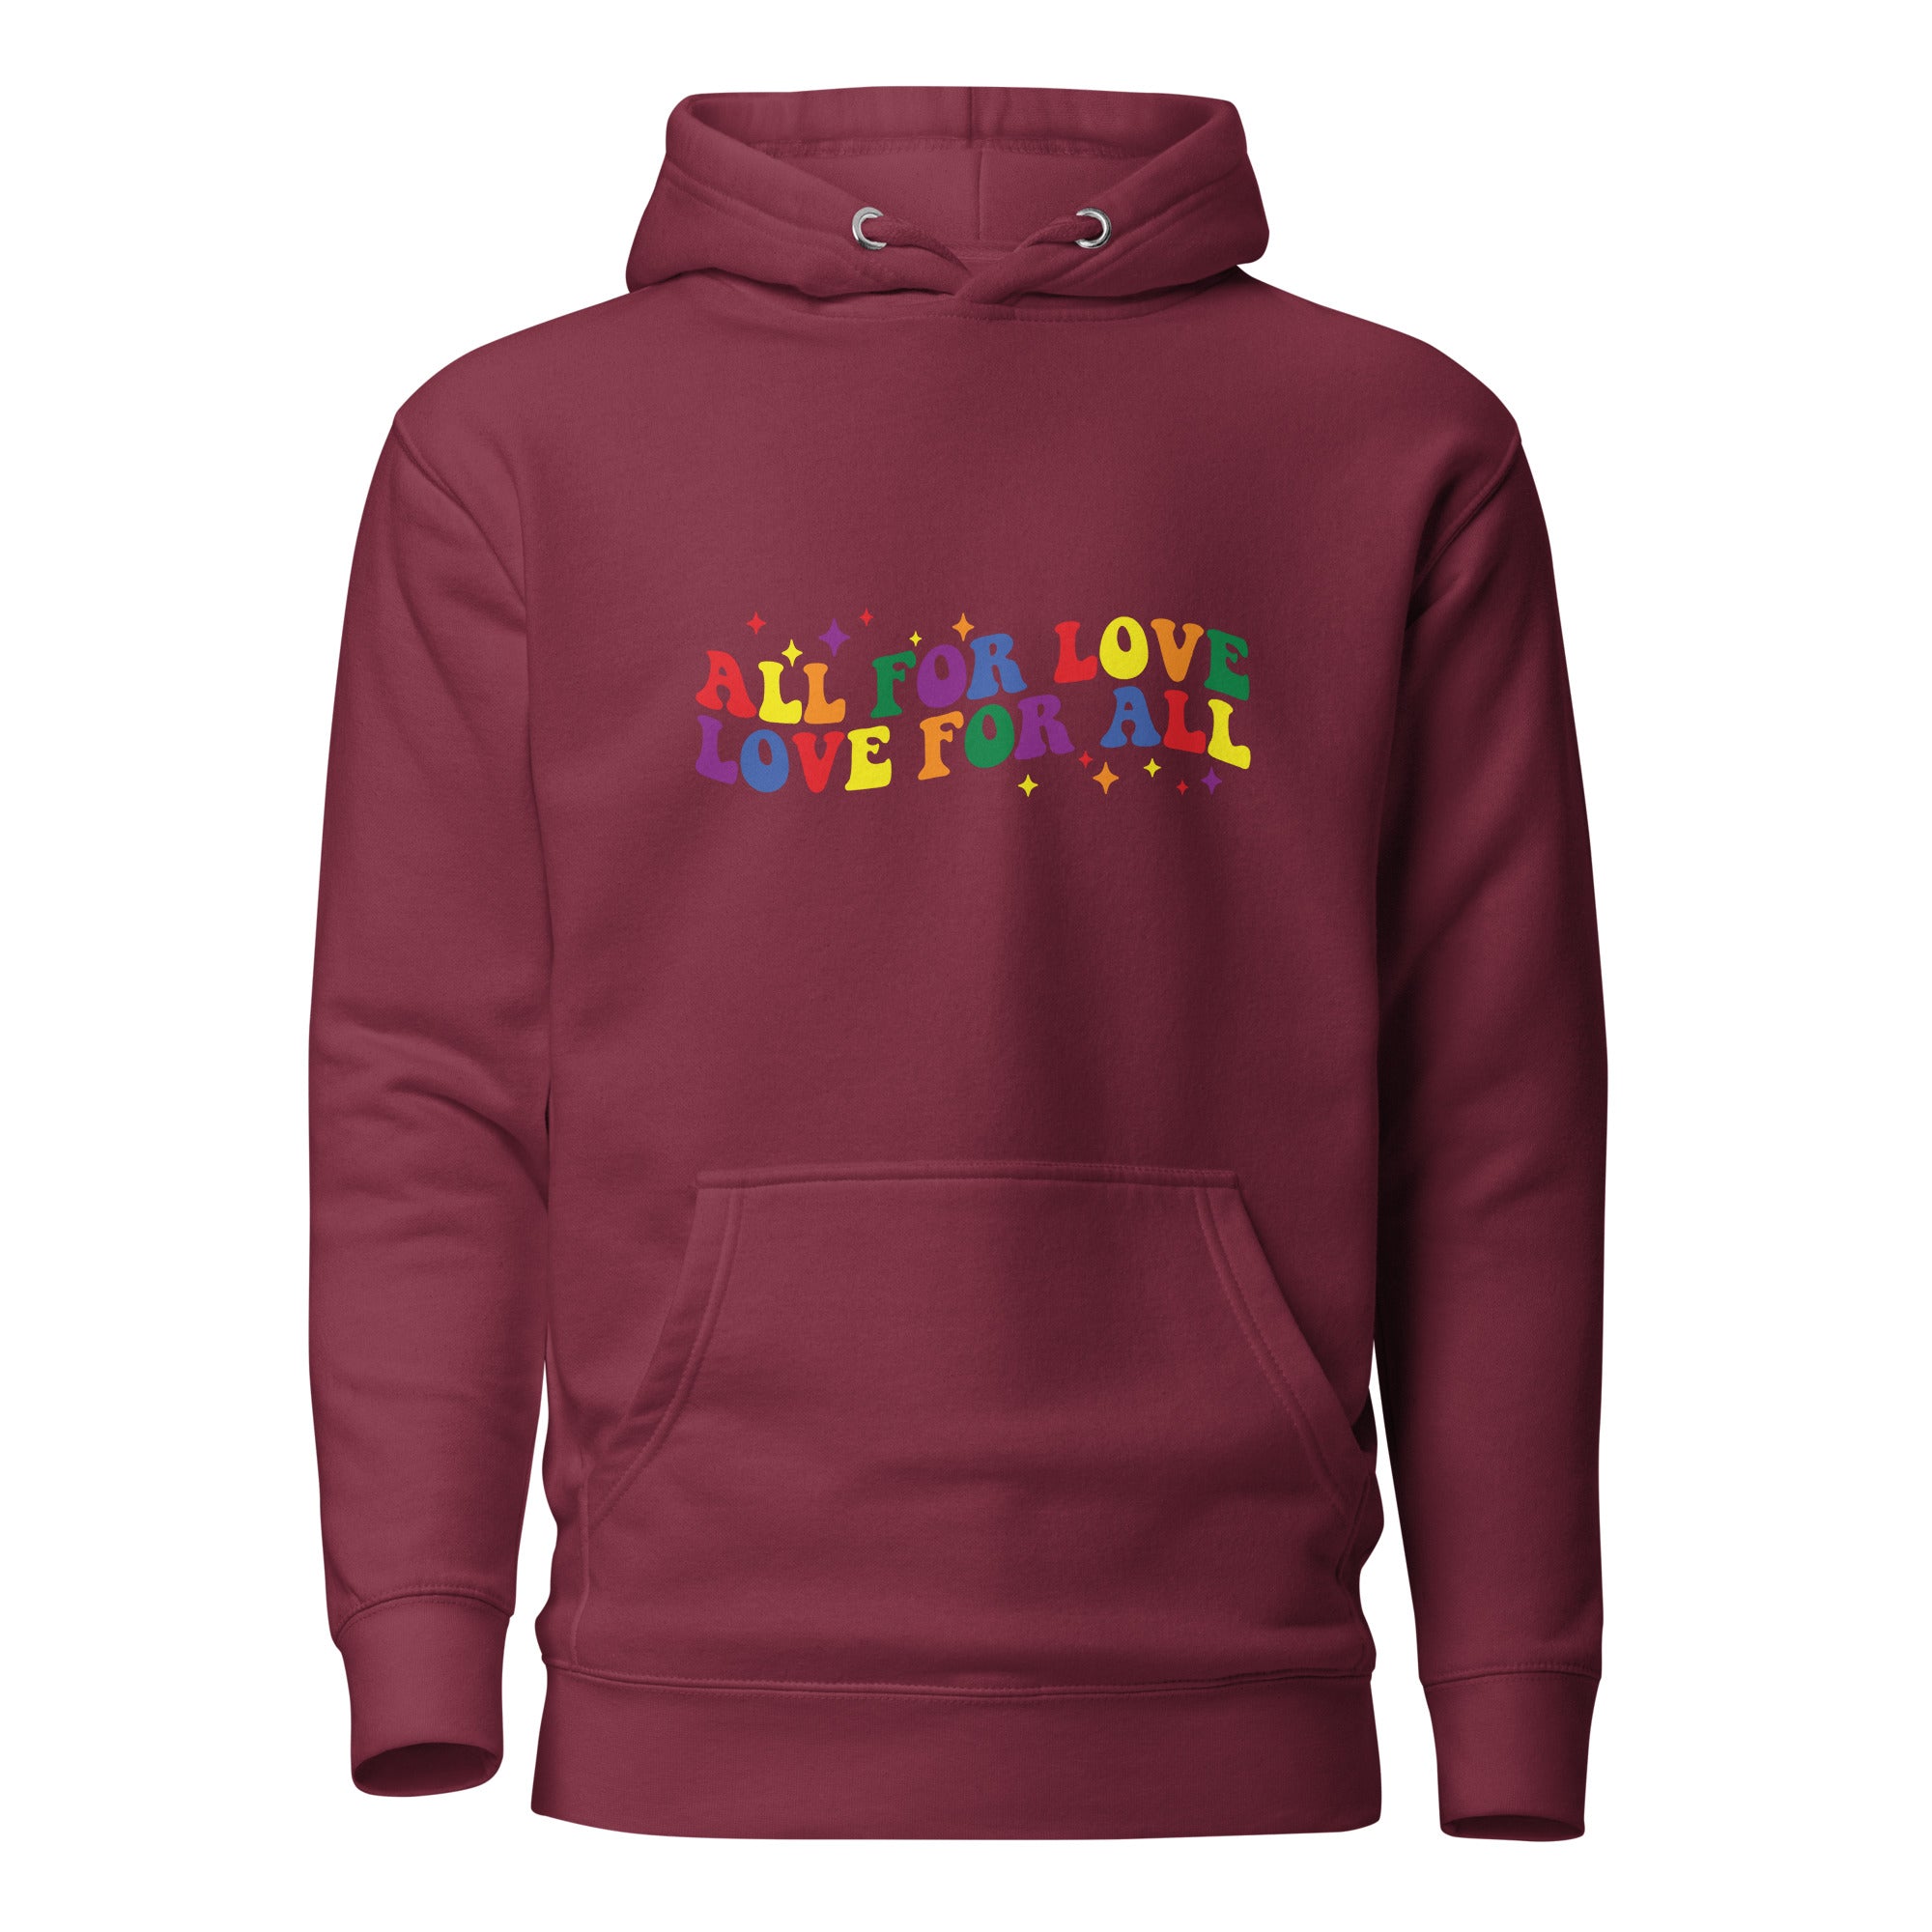 Unisex Hoodie- All for love, love for all